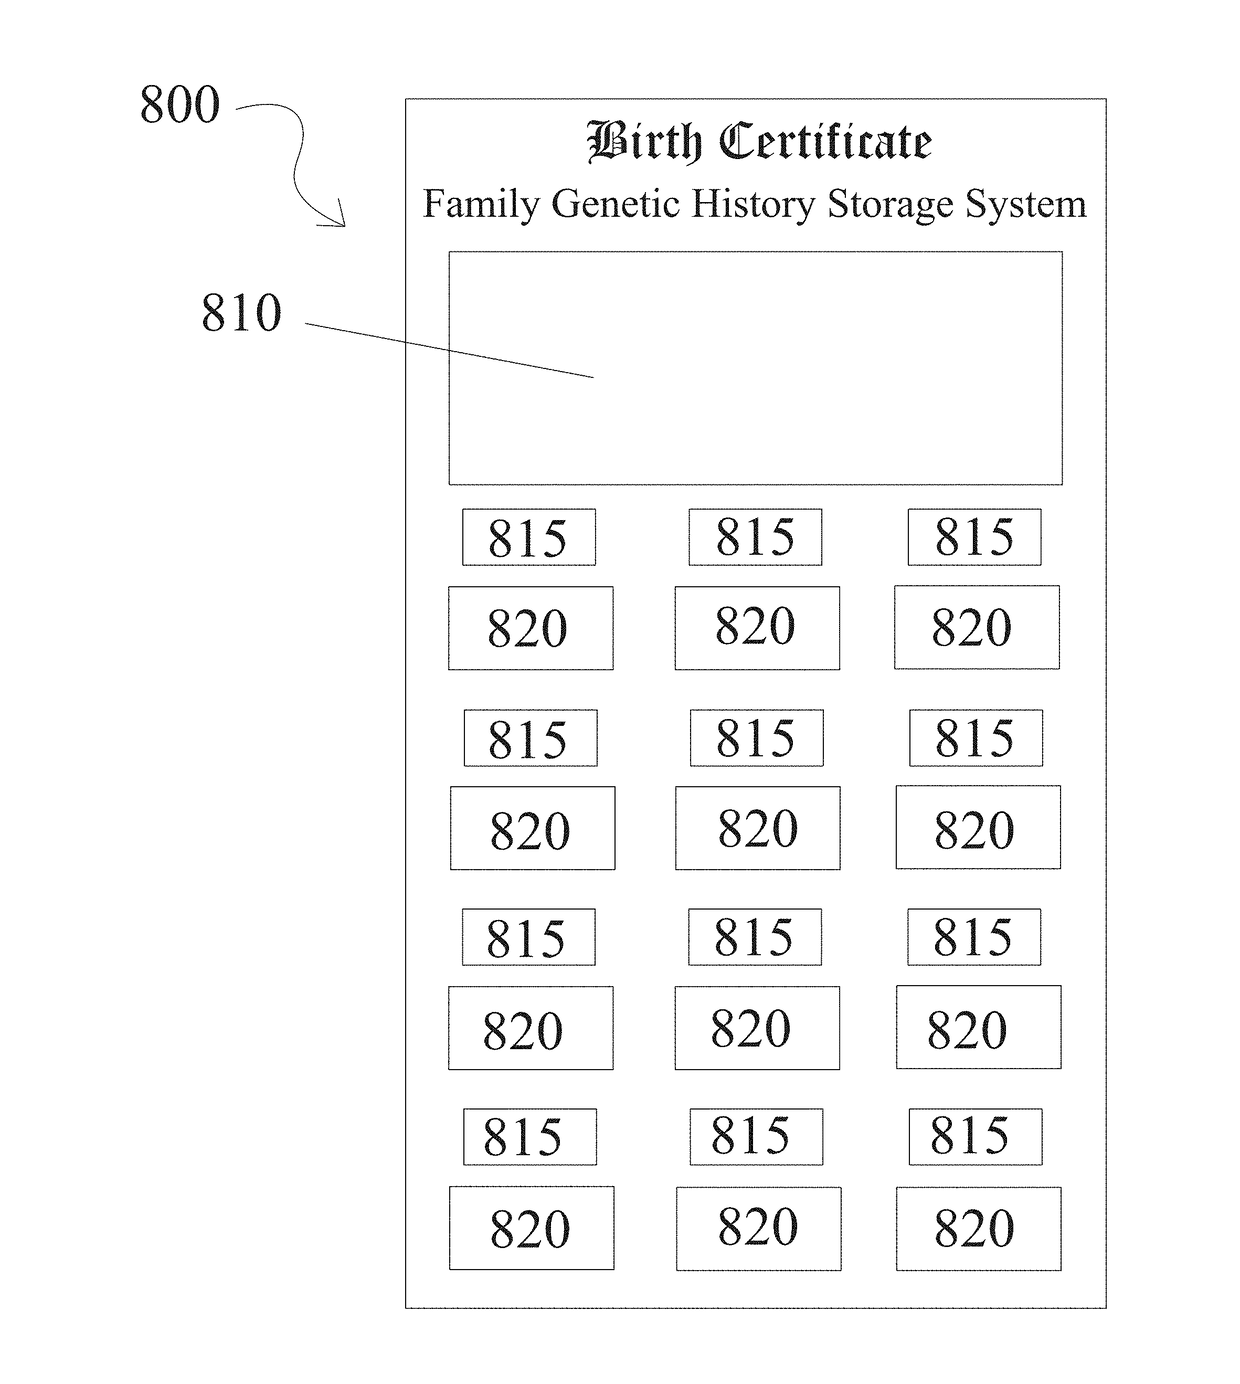 Family genetic history storage system for storing DNA information on an identification certificate